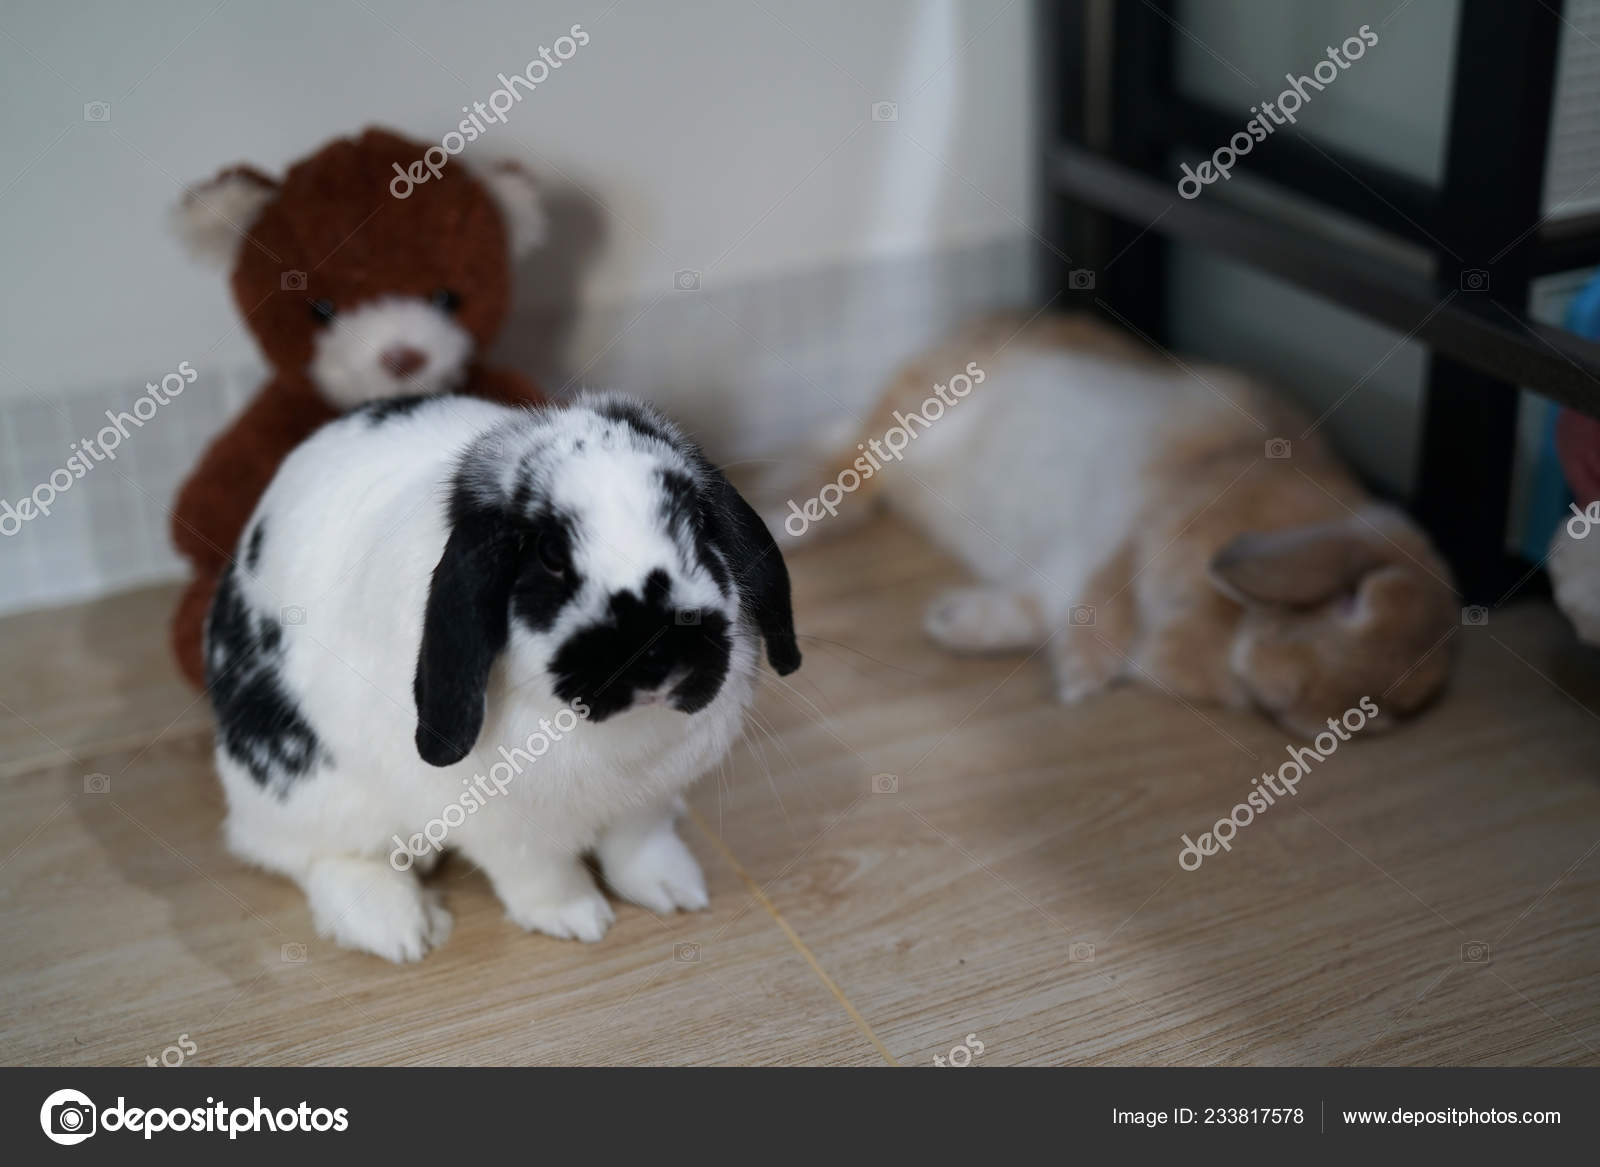 Rabbit Bunny Holland Lop Black White Brown Color Relax Floor Stock Photo C Alicebuddy 233817578